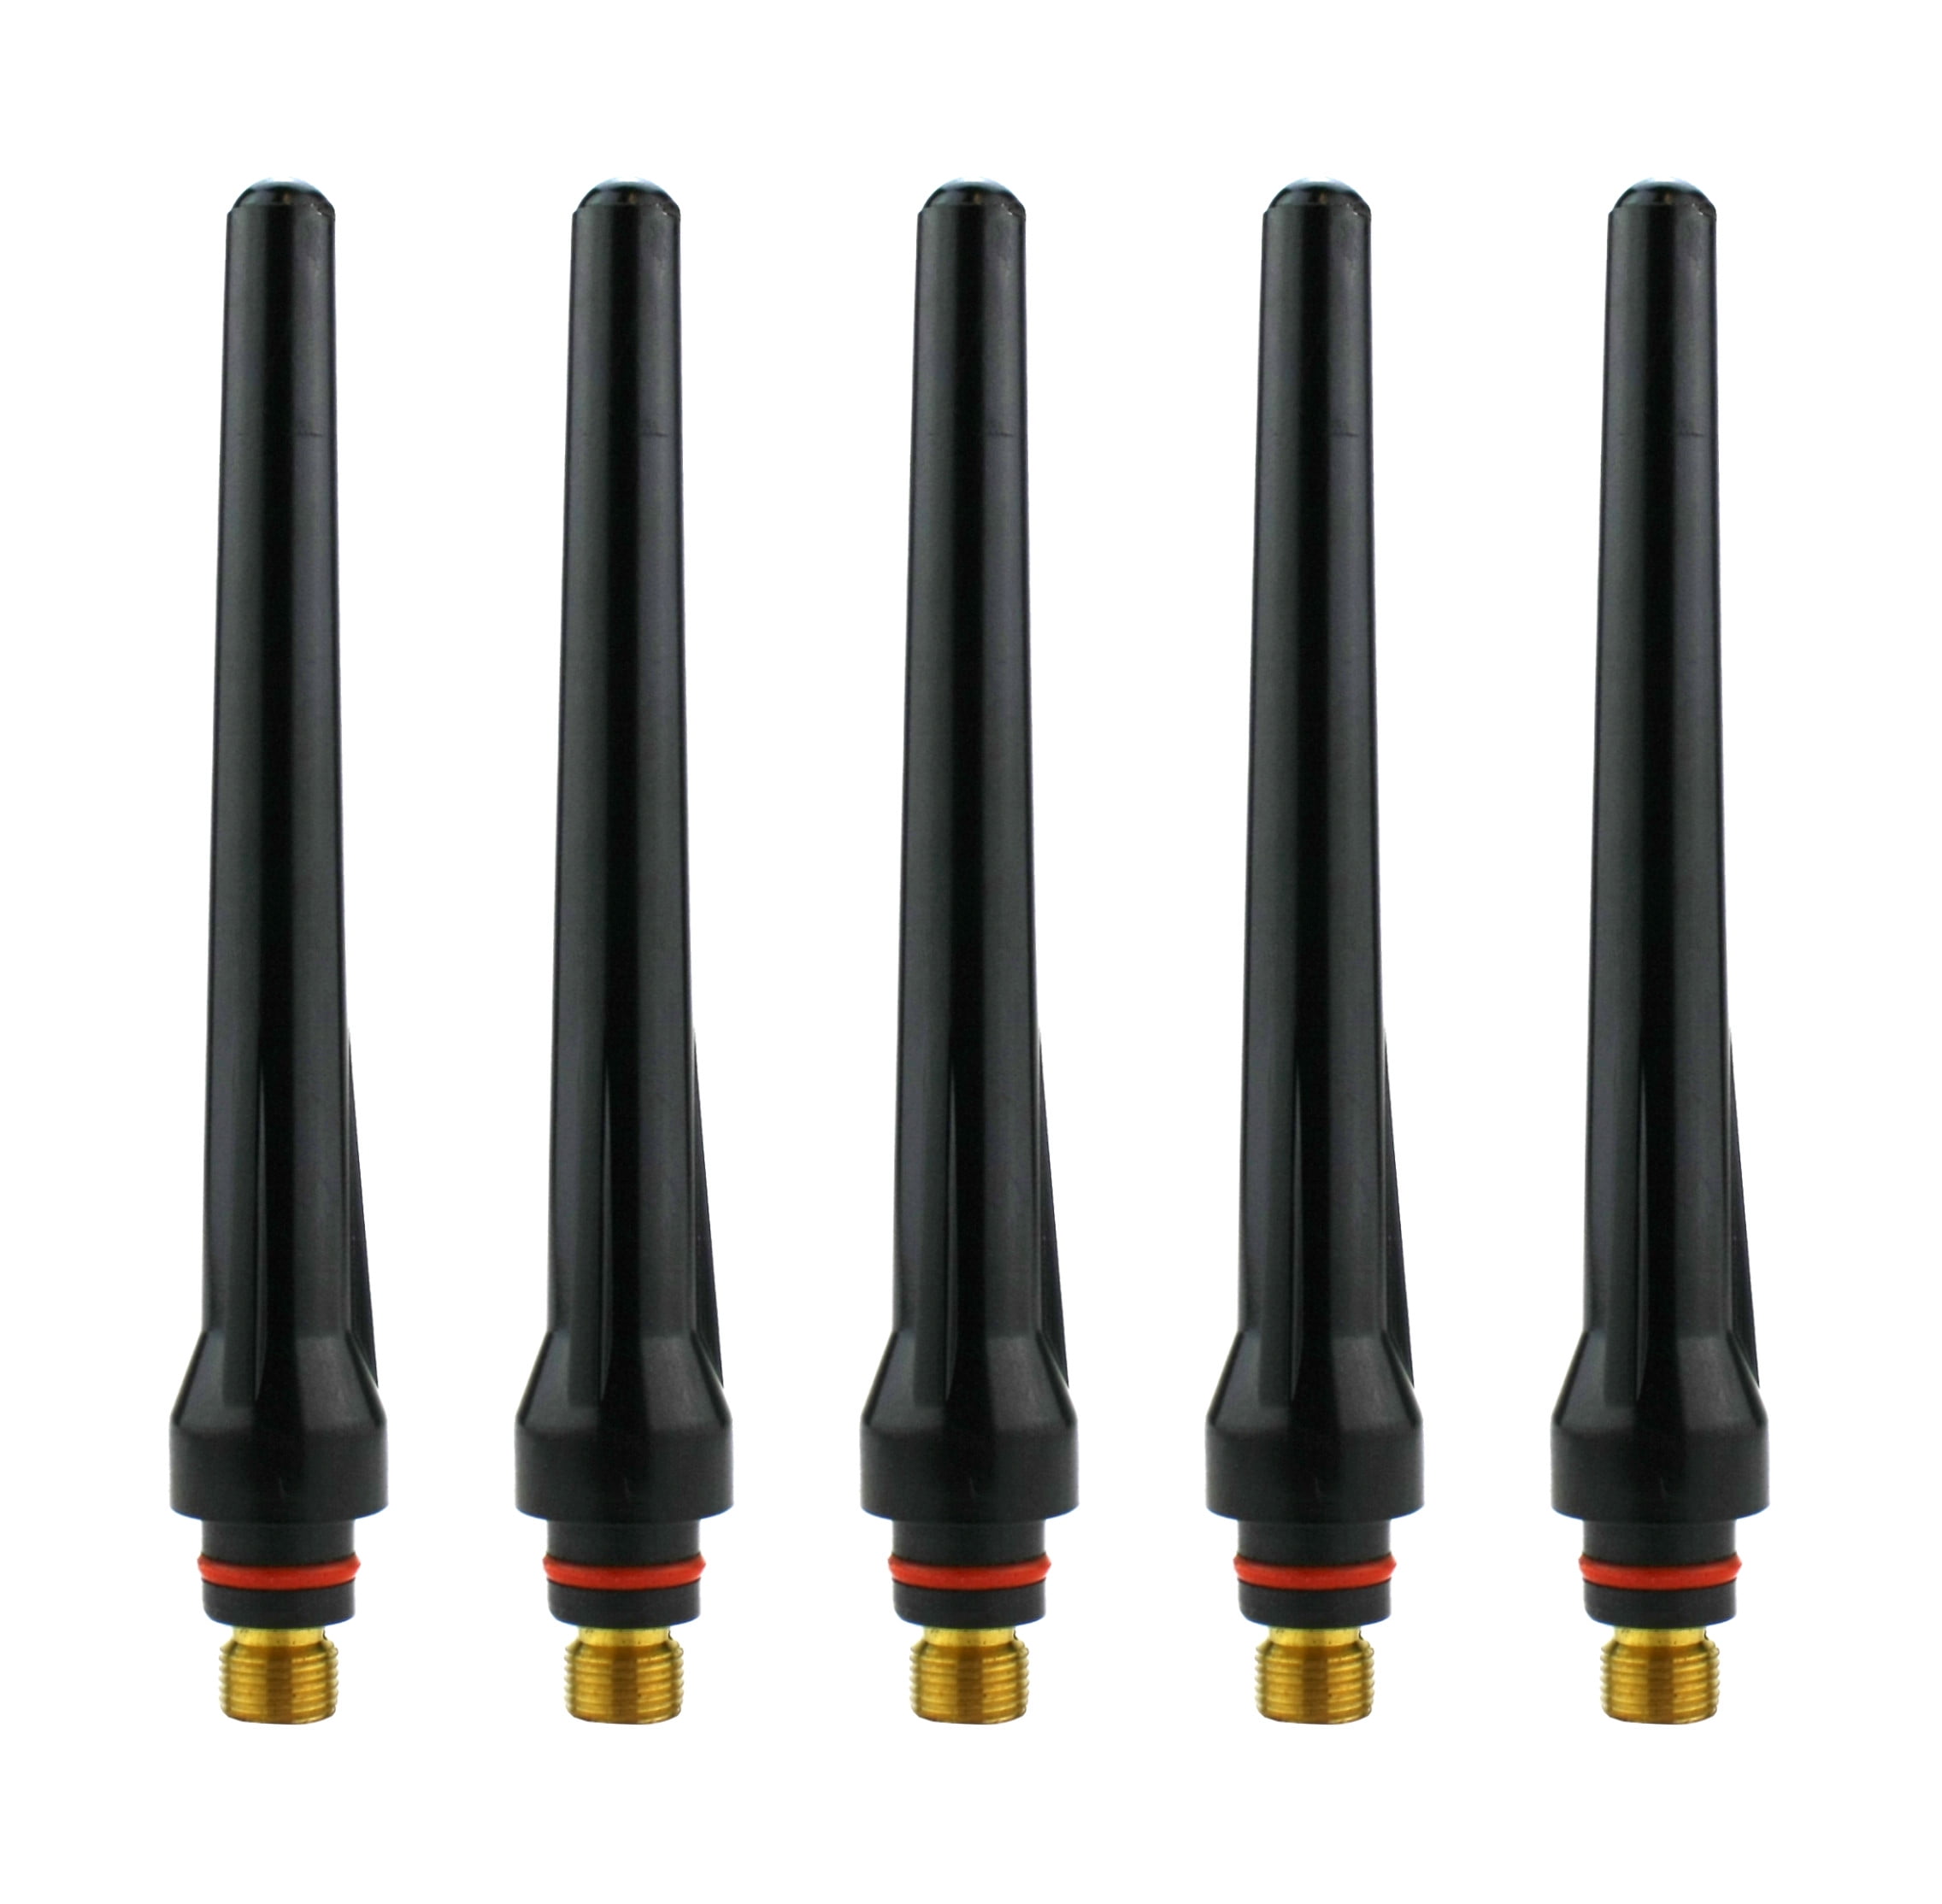 Long Back Cap for TIG Welding Torches 17/18/26 - Model: 57Y02 - (5 PACK)